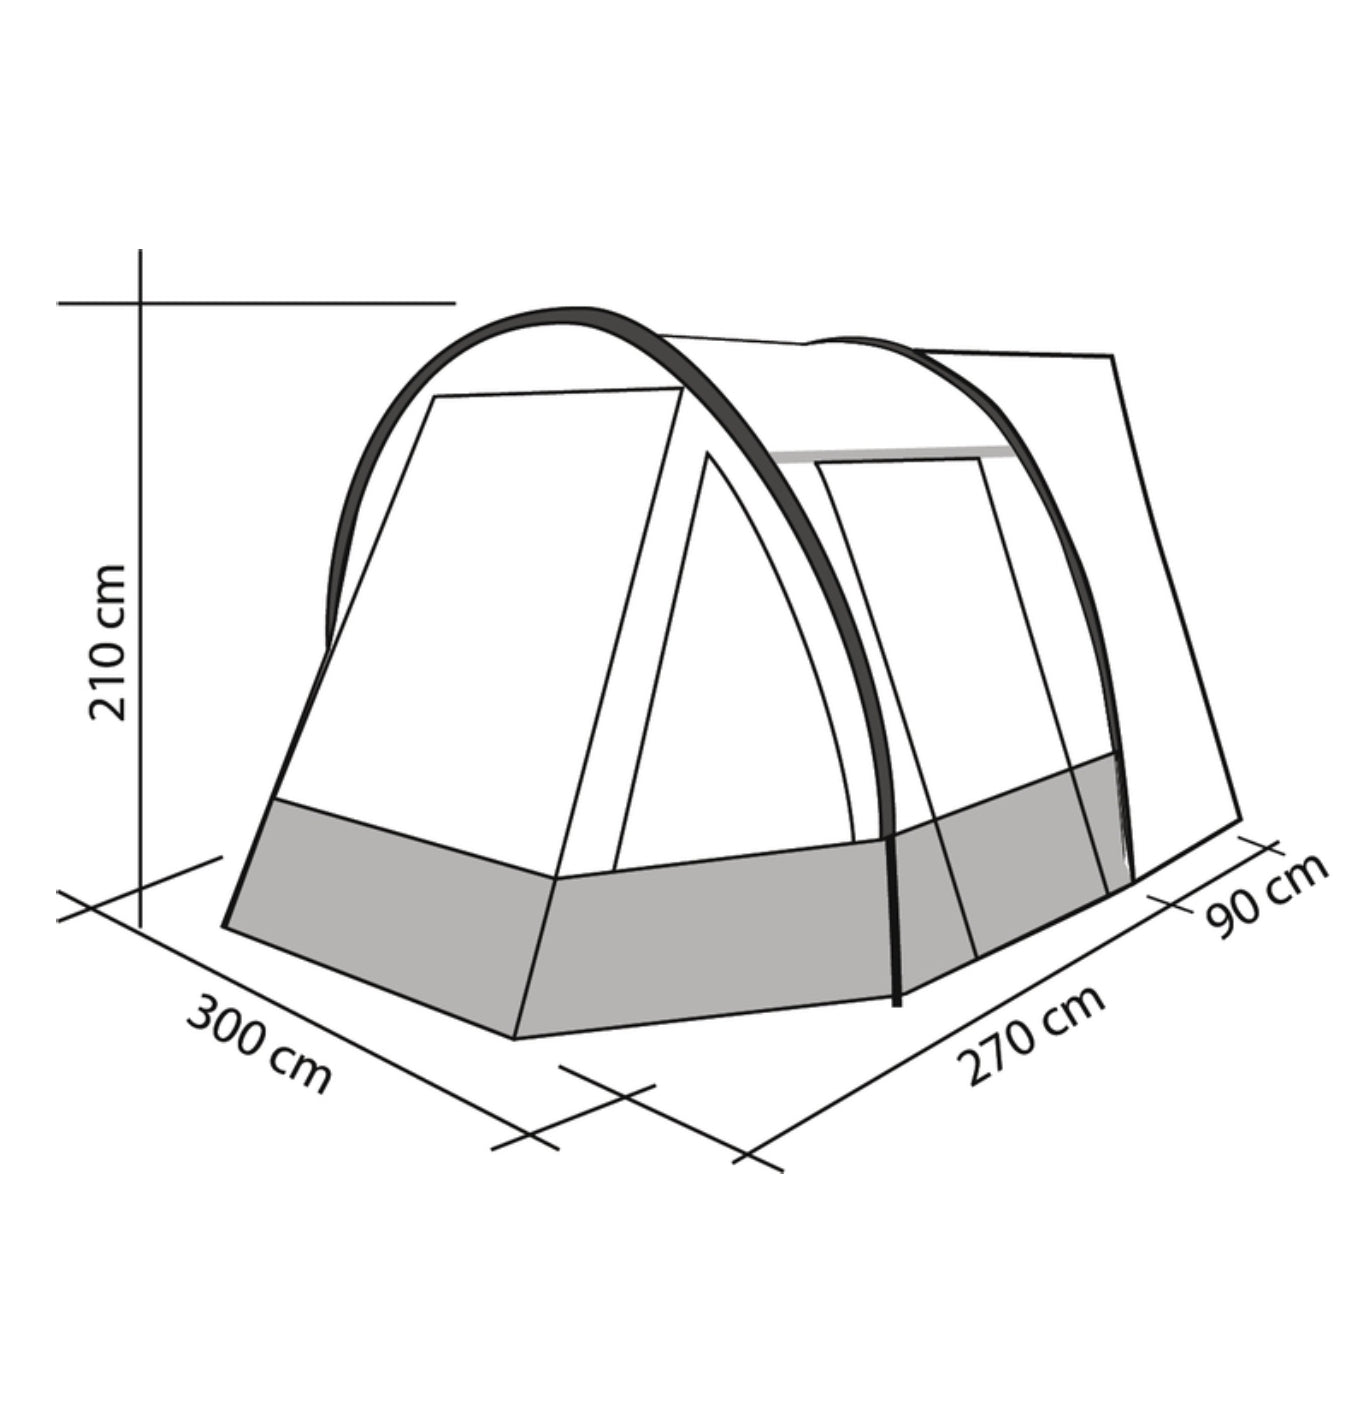 Dimensions of the tour easy drive away awning